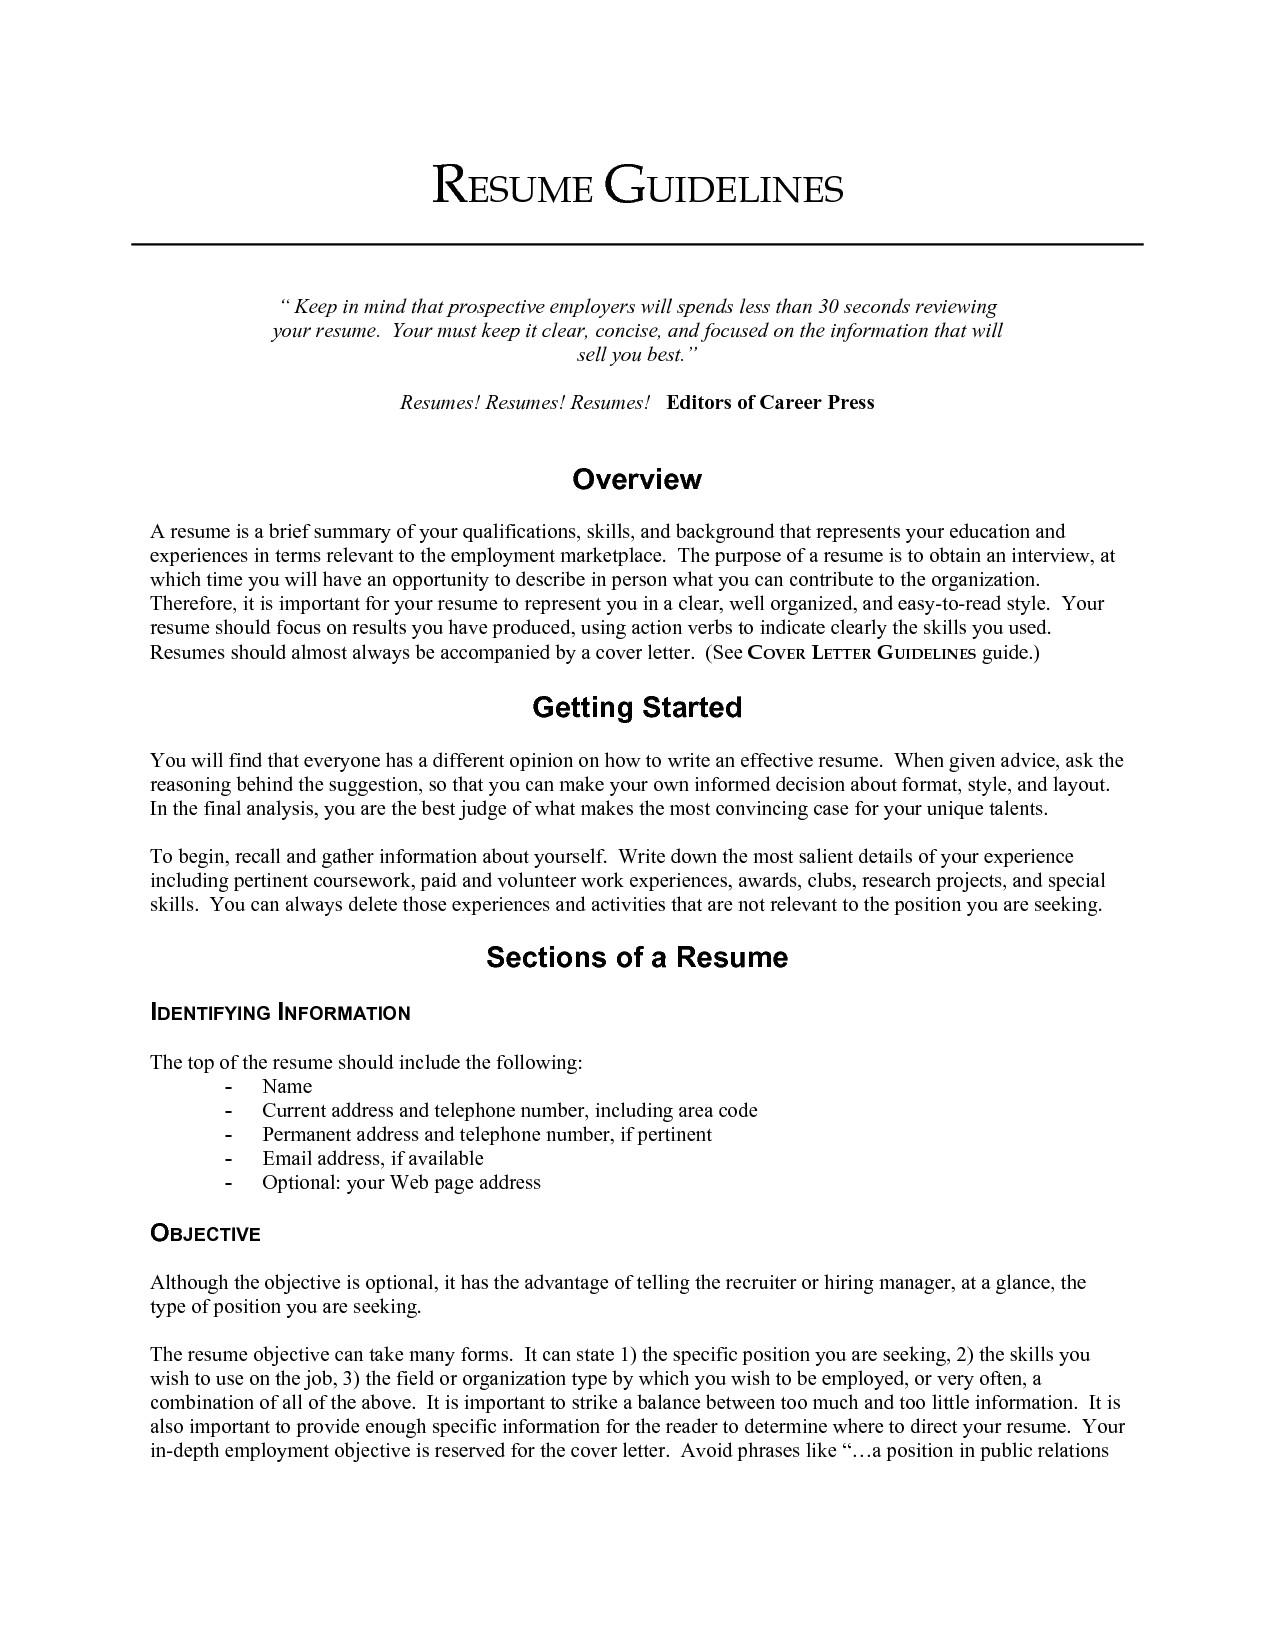 Condensed Resume Template Identifying Key Words to Put On Your Resume Mla format